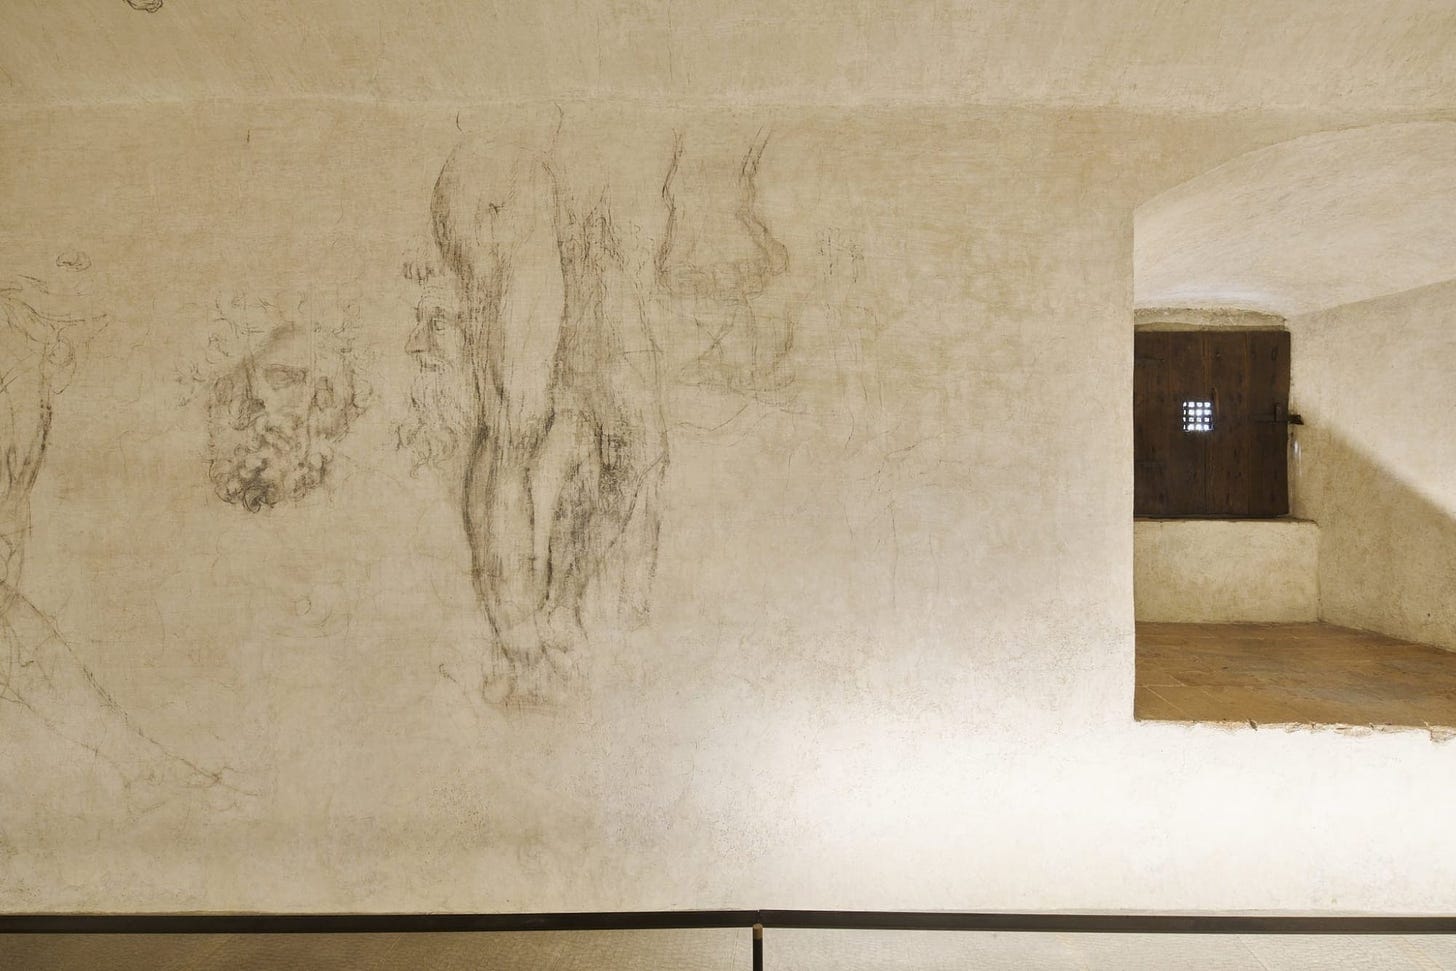 figurative charcoal drawings cover the beige walls of a room